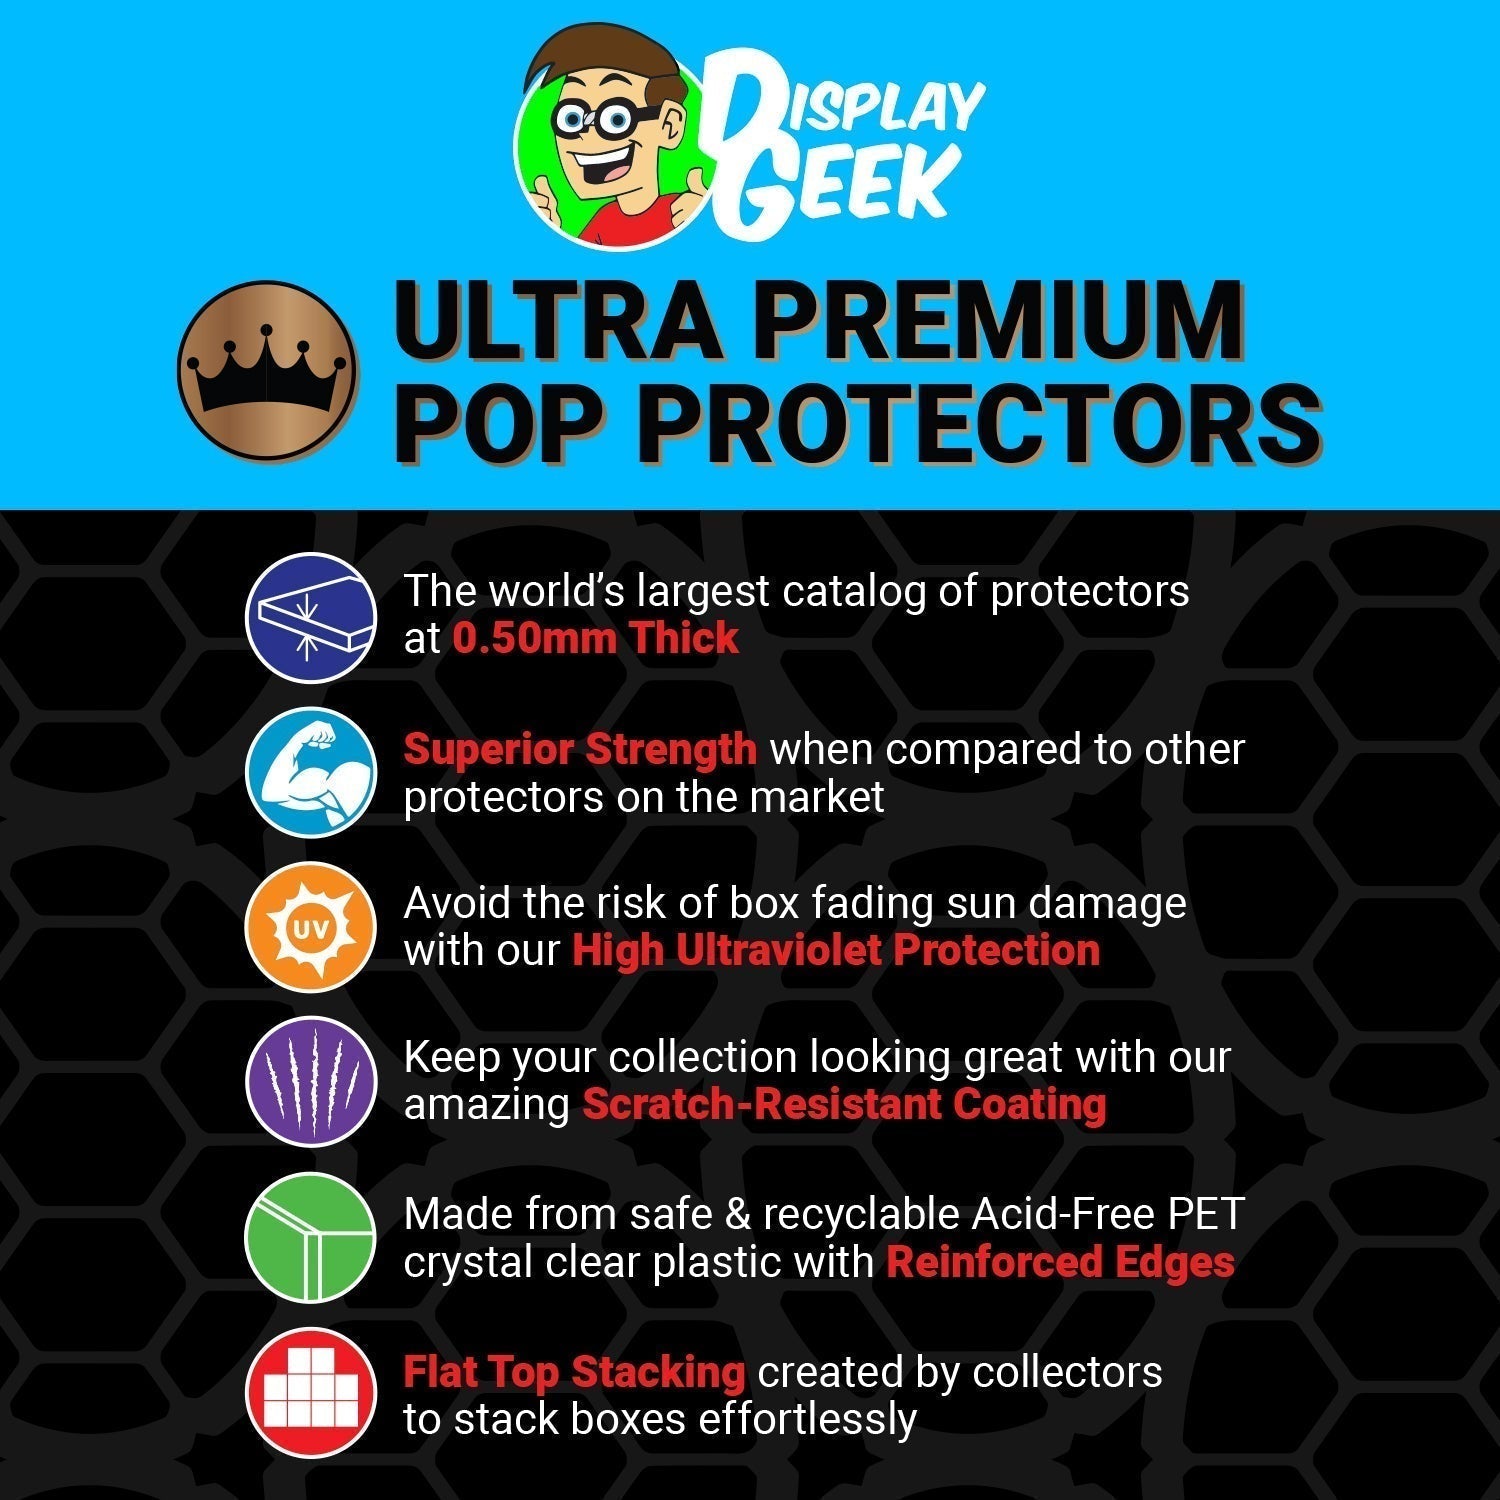 Pop Protector for Alice at the Mad Tea Party #54 Funko Pop Rides - PPG Pop Protector Guide Search Created by Display Geek